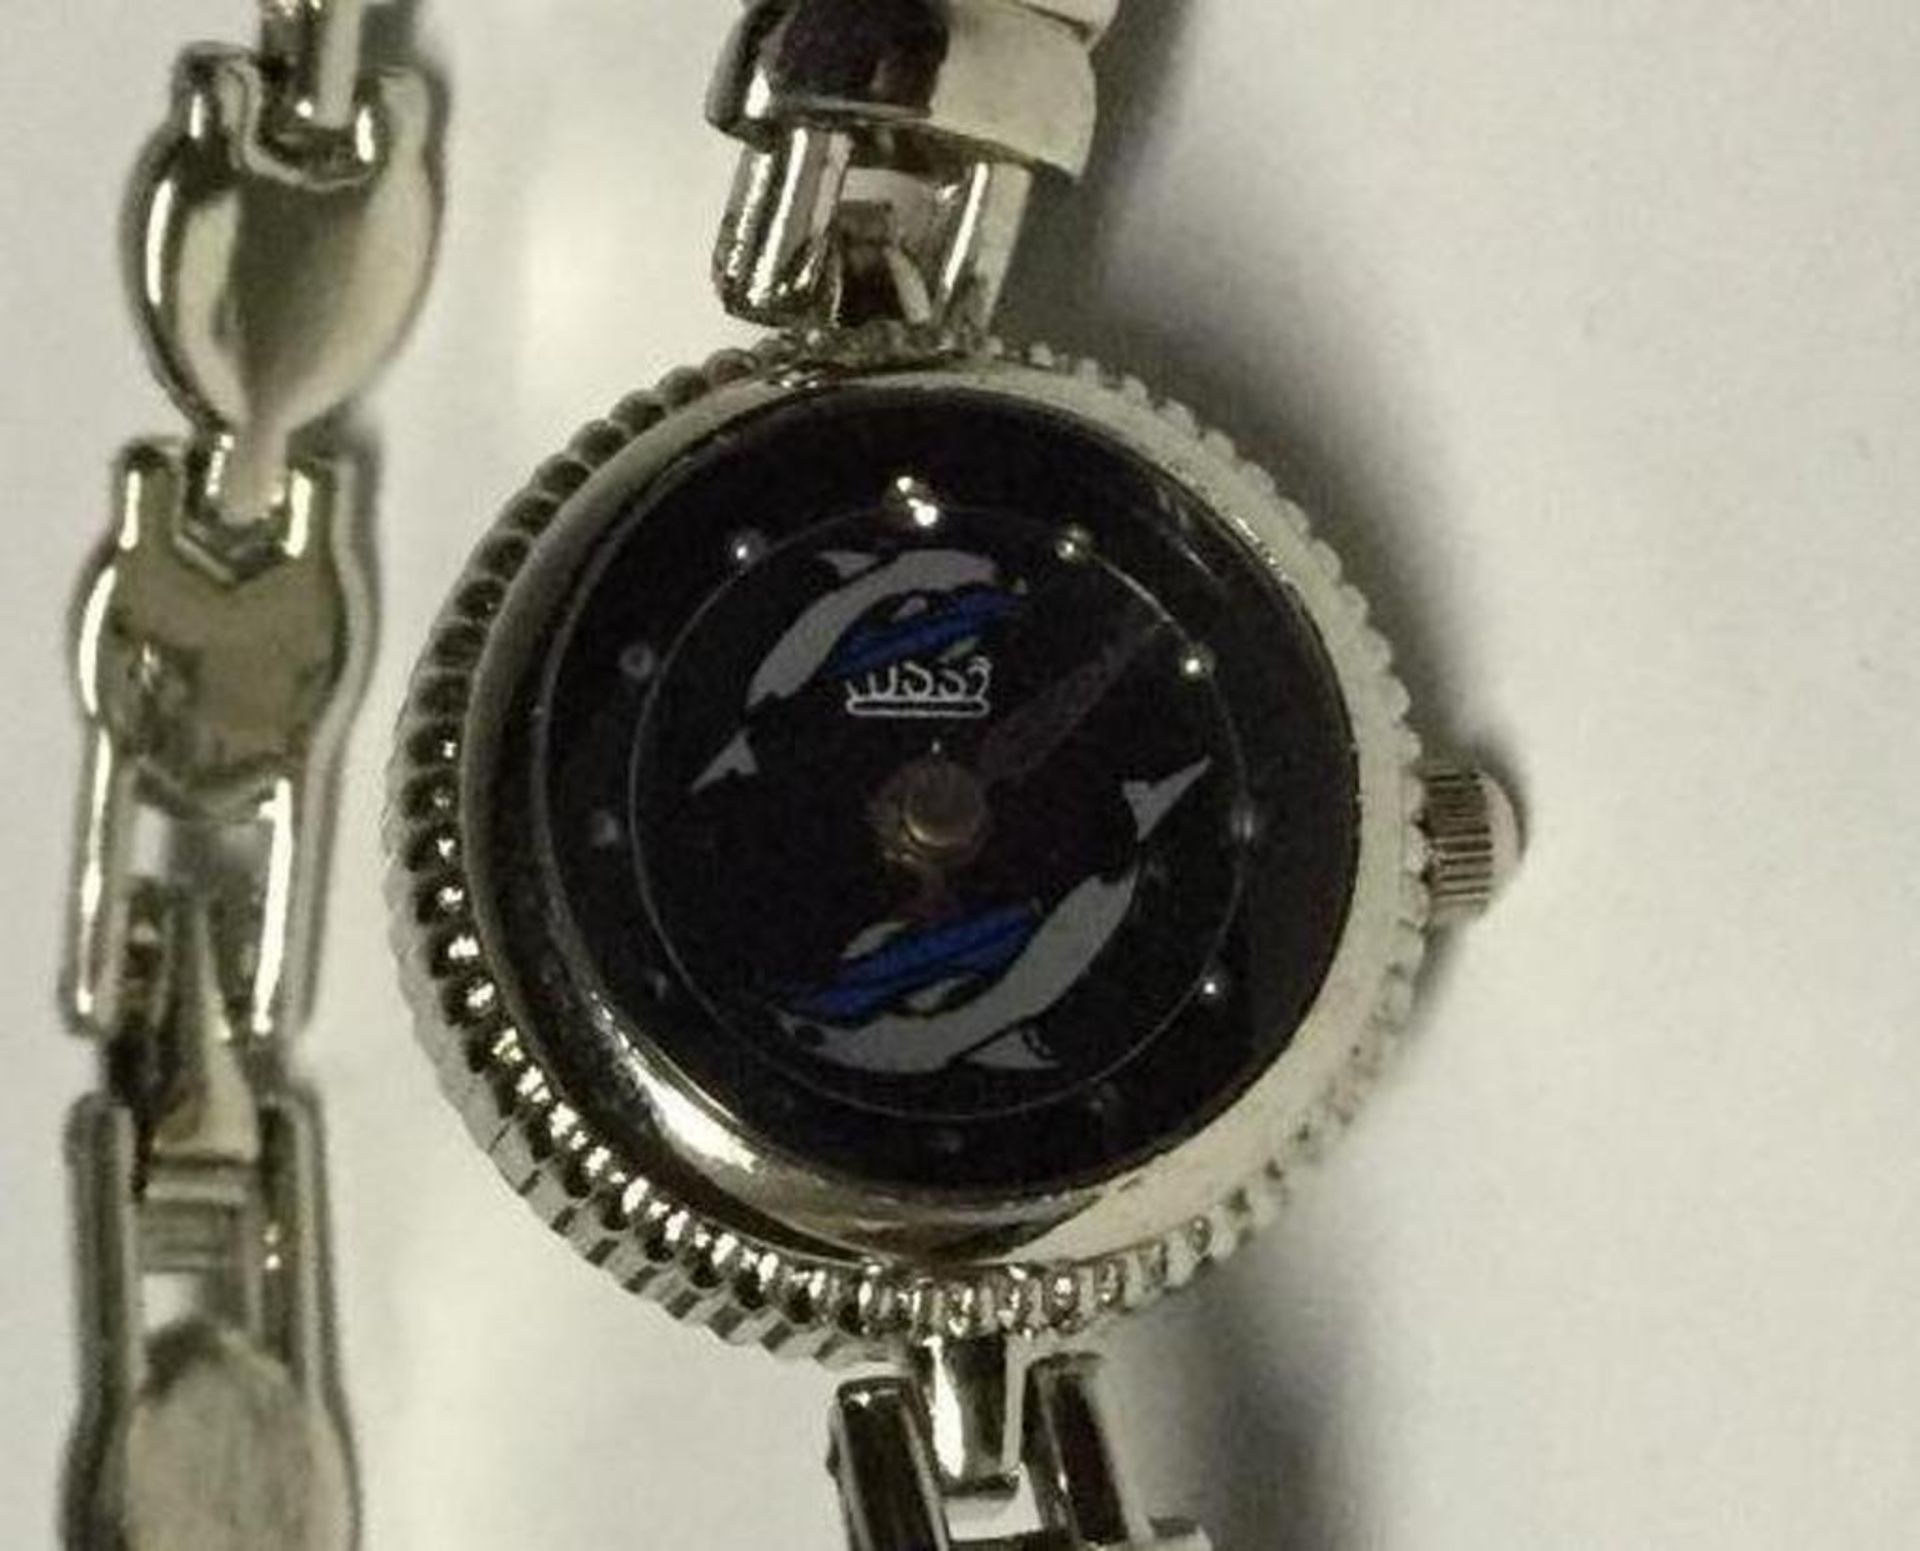 Ladies Cuss Watch with Dolphin second hand - Image 2 of 2